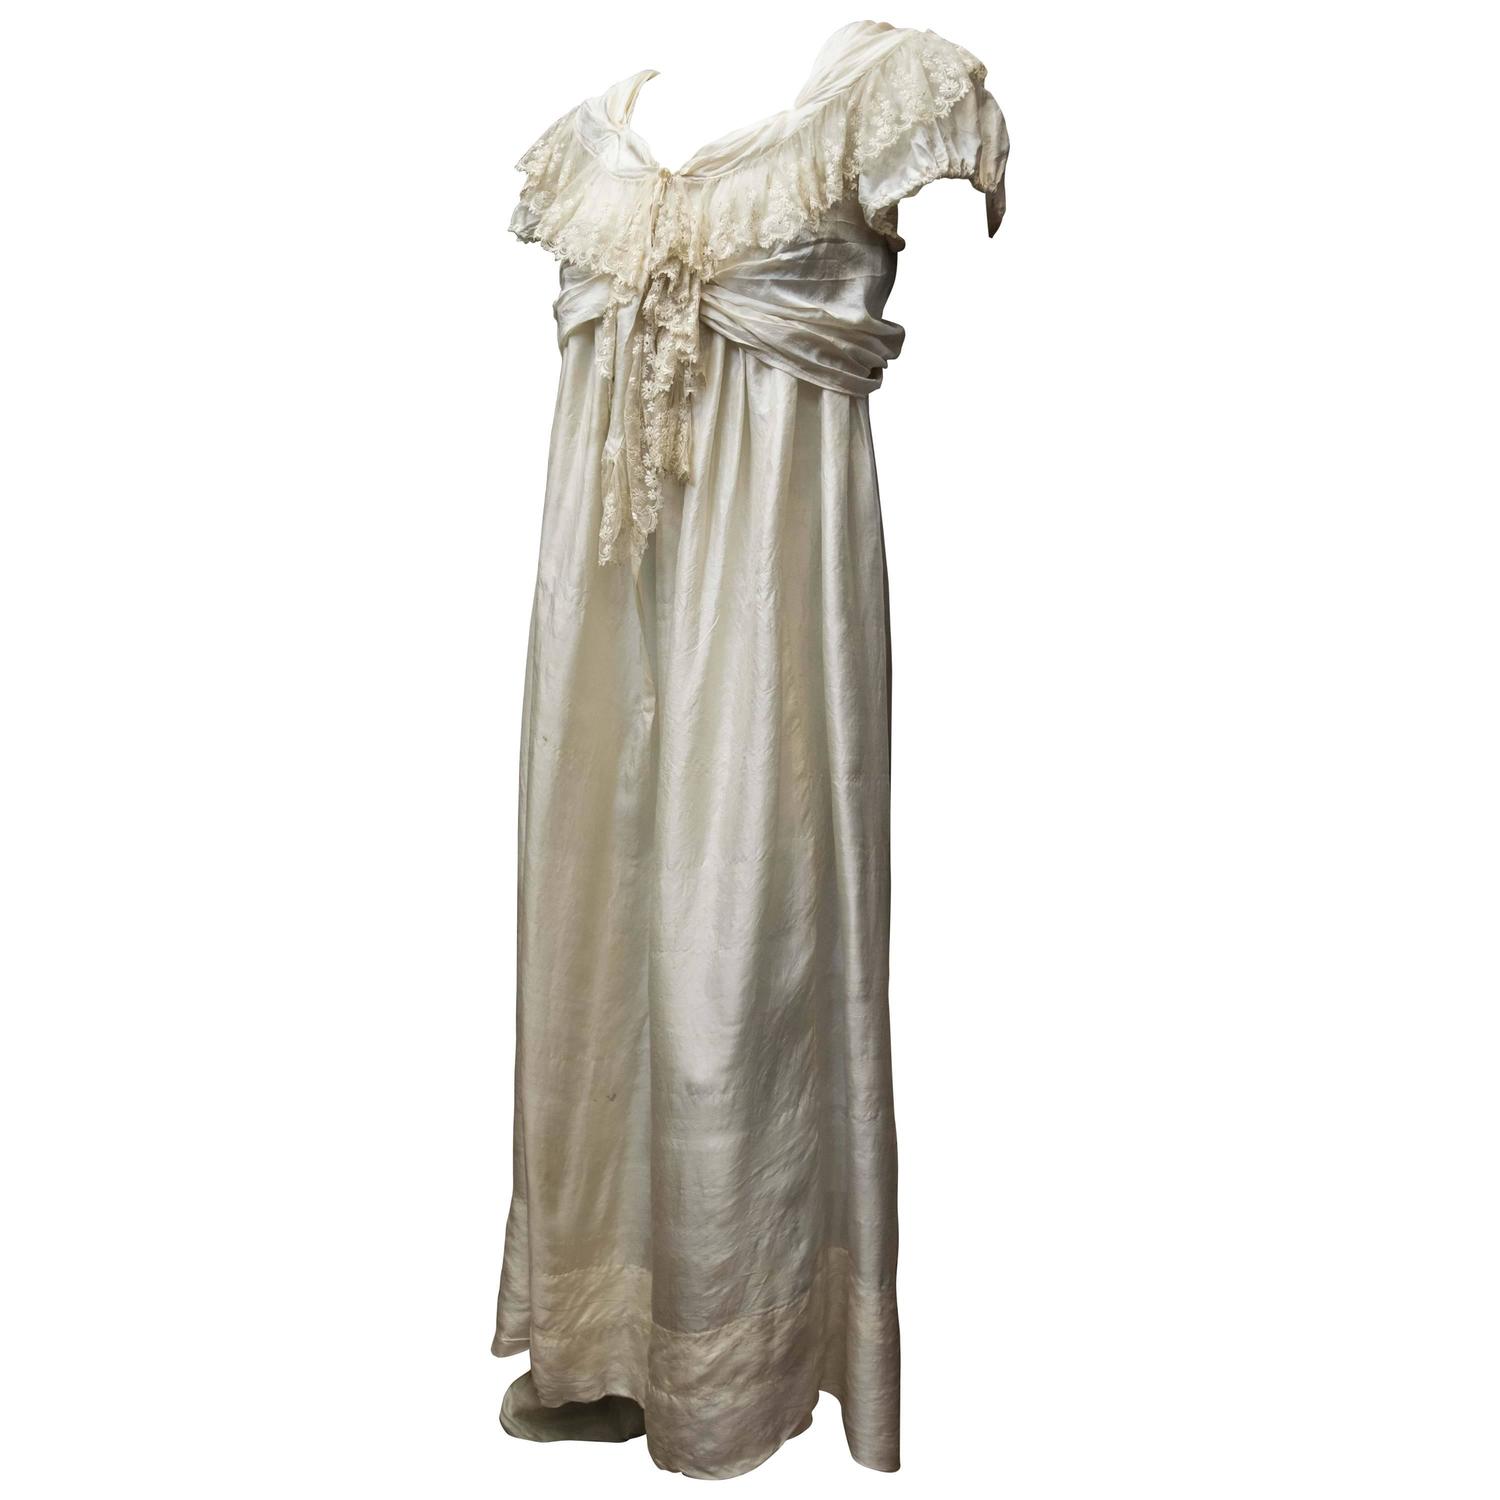 Edwardian Silk Nightgown For Sale at 1stdibs